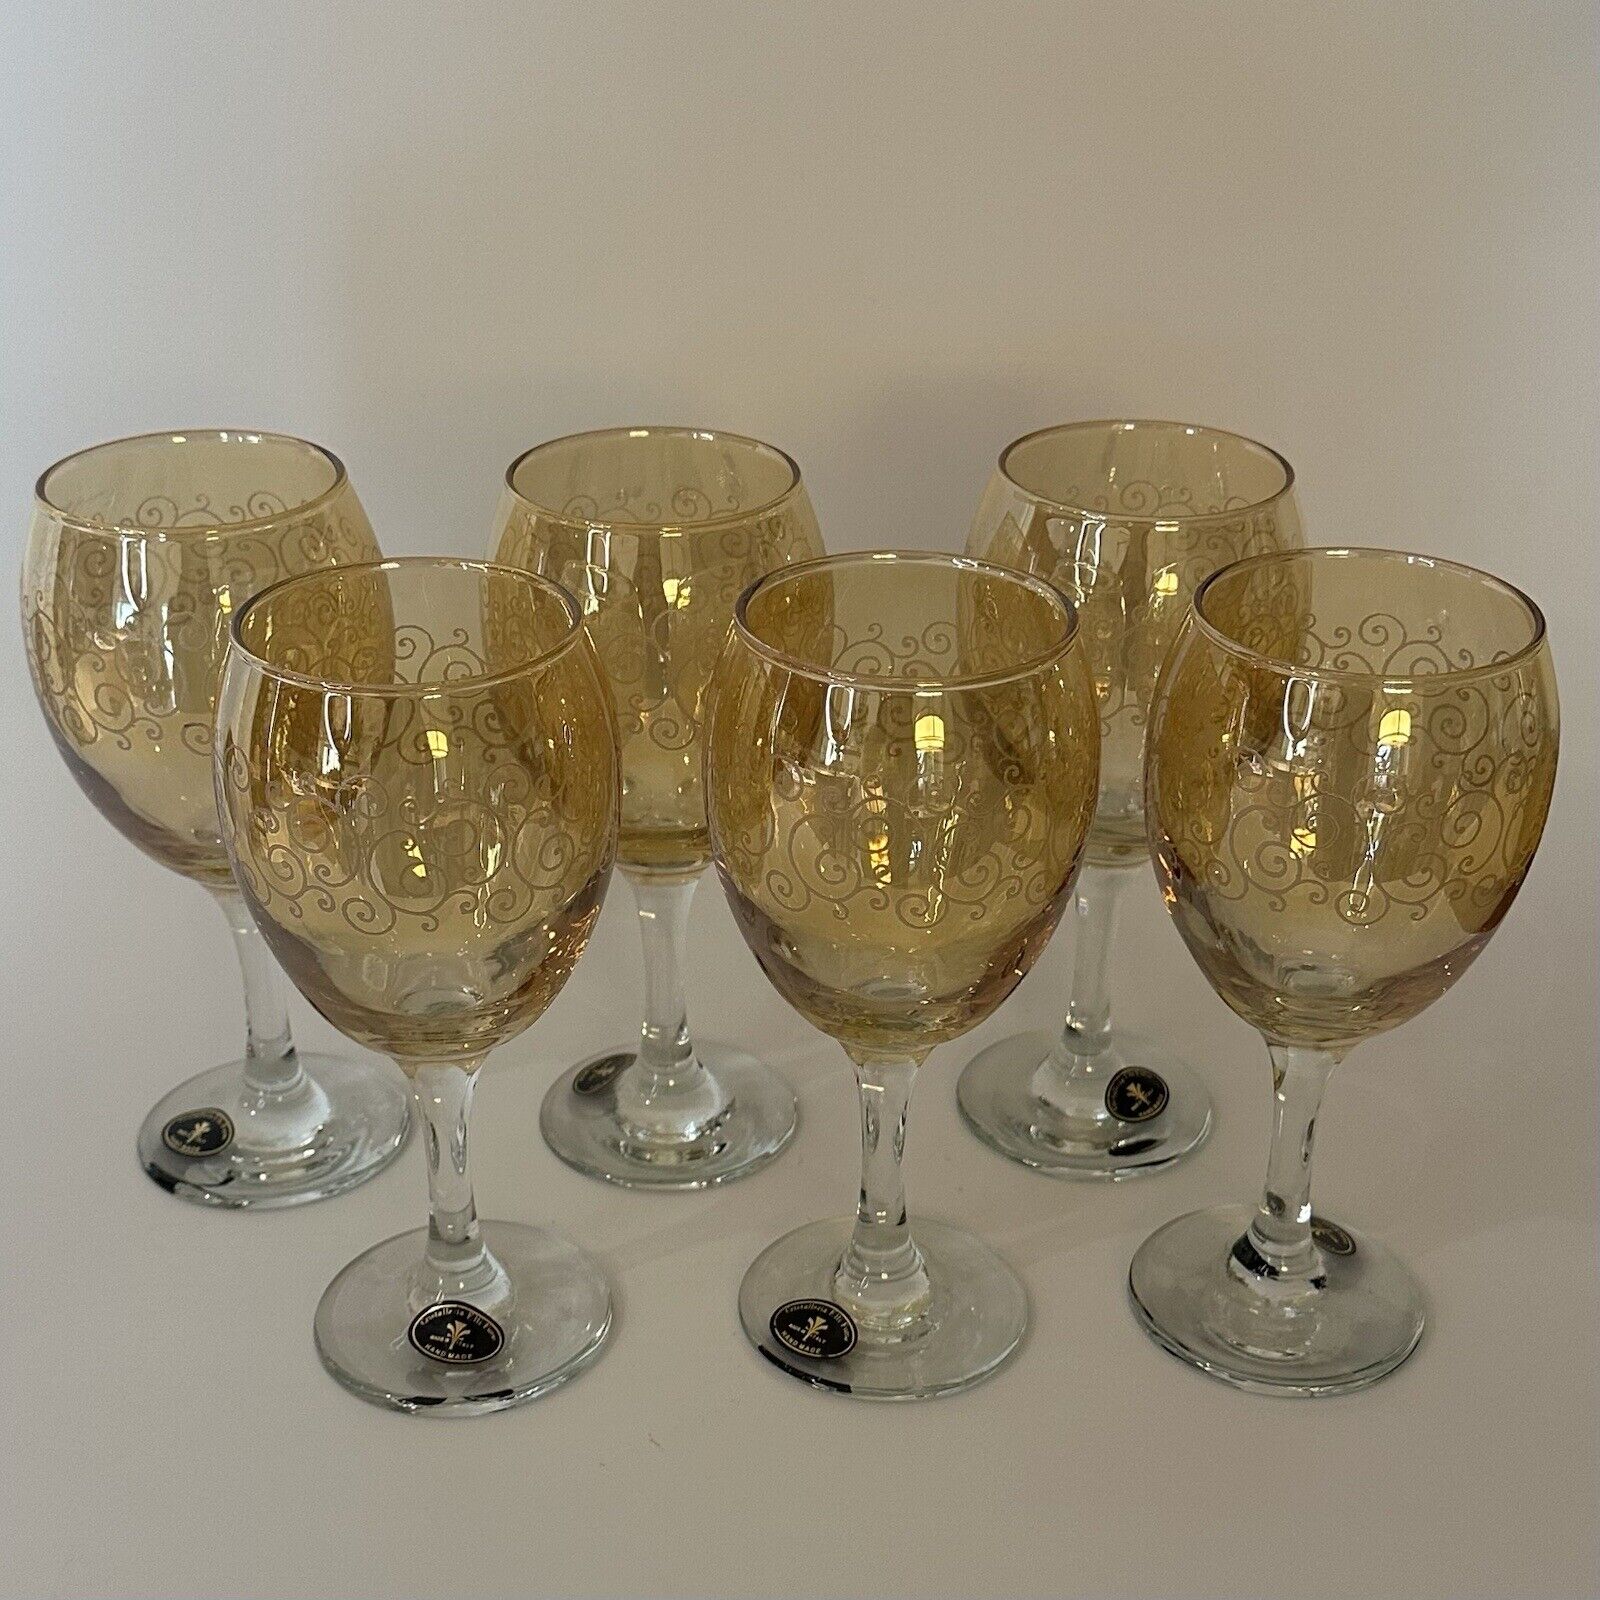 Cristalleria Fumo Handmade Wine Glasses Italy Glass Etched - Set of 6